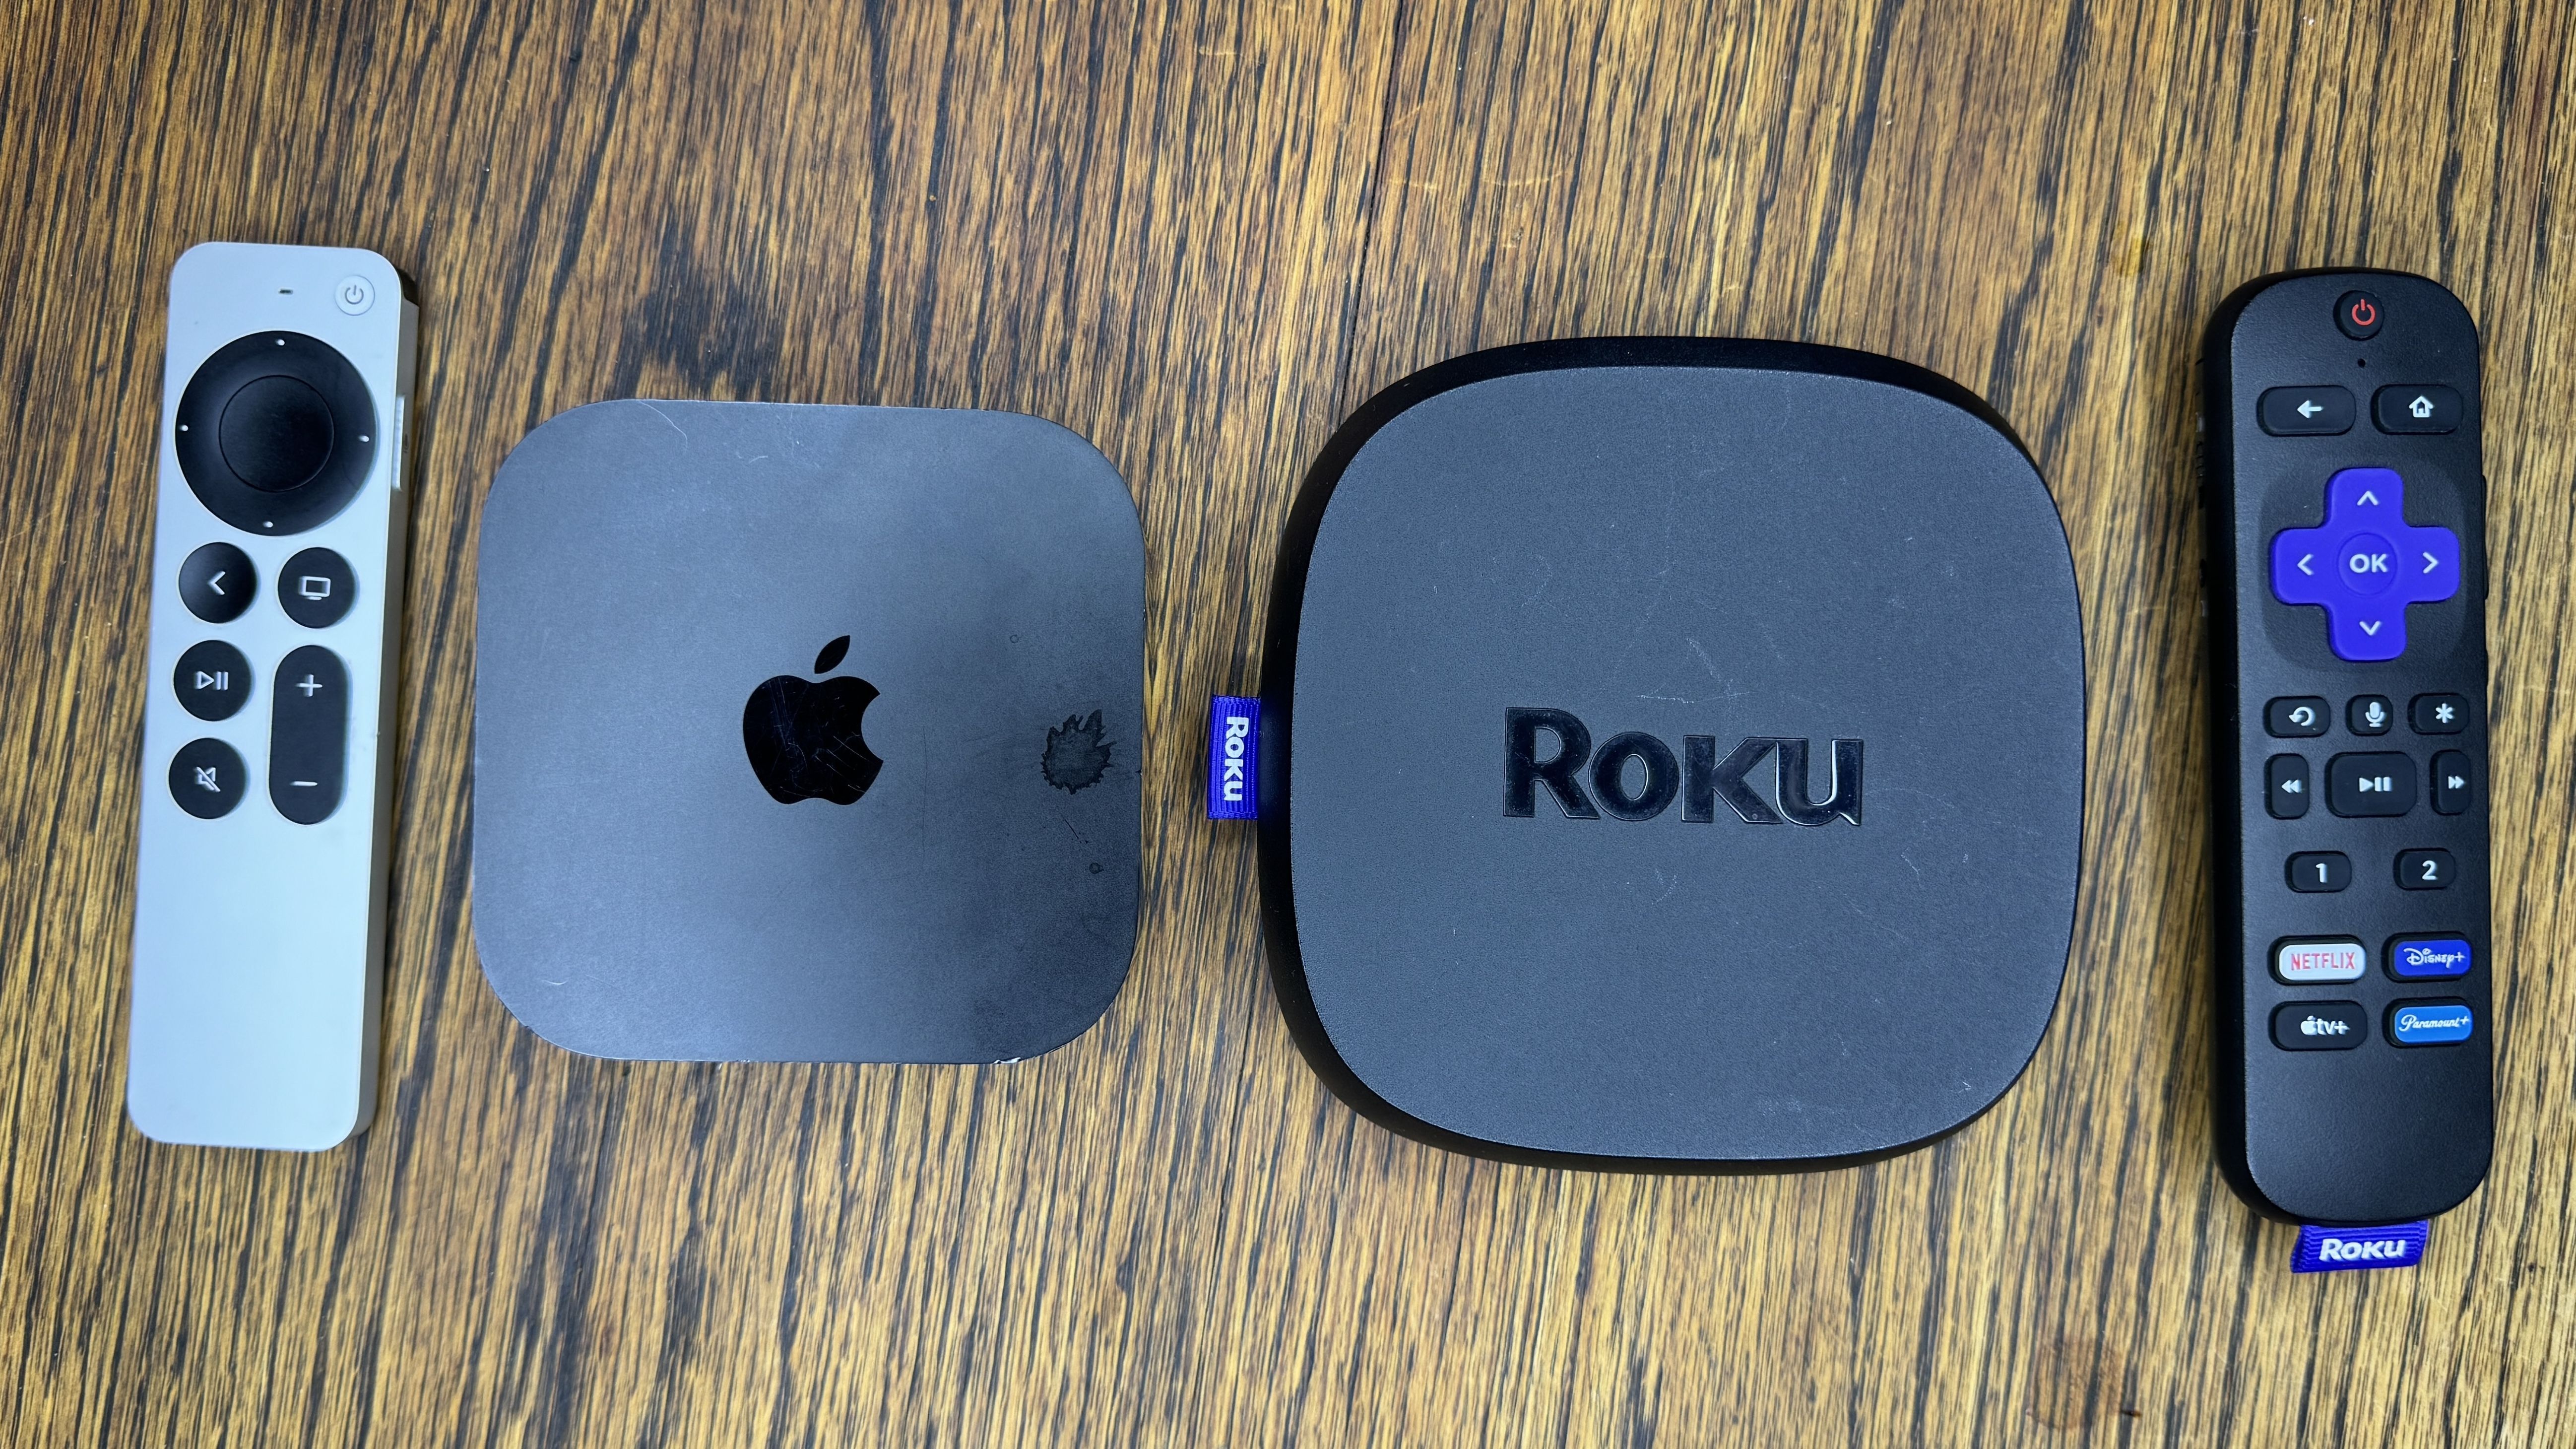 Roku vs Fire Stick: Which one is right for your streaming needs?